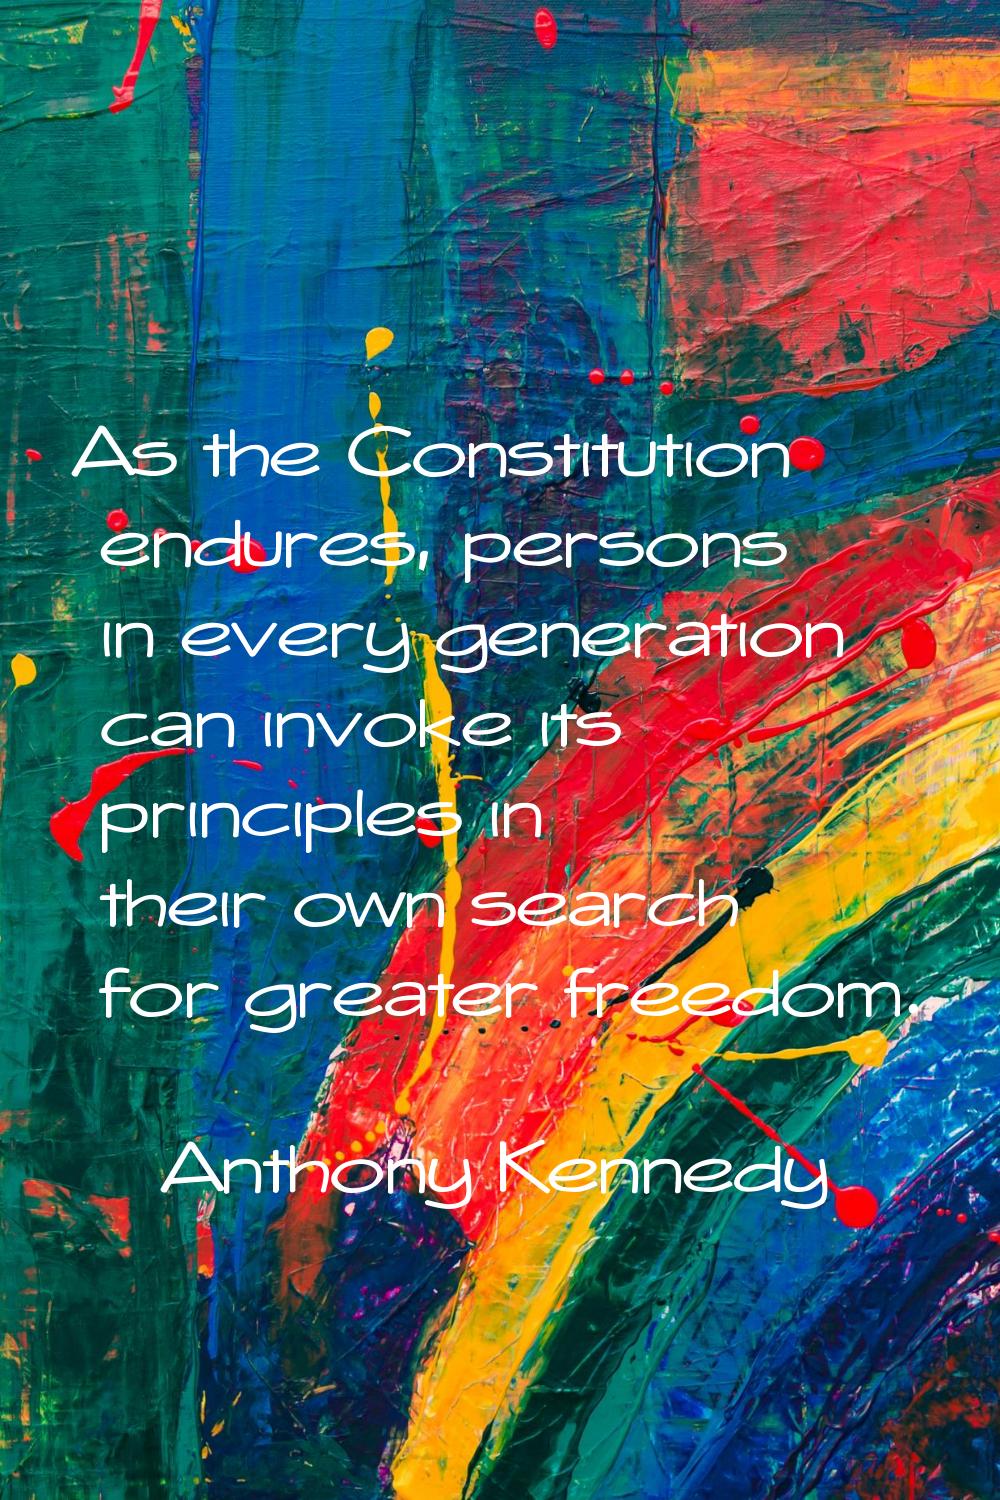 As the Constitution endures, persons in every generation can invoke its principles in their own sea